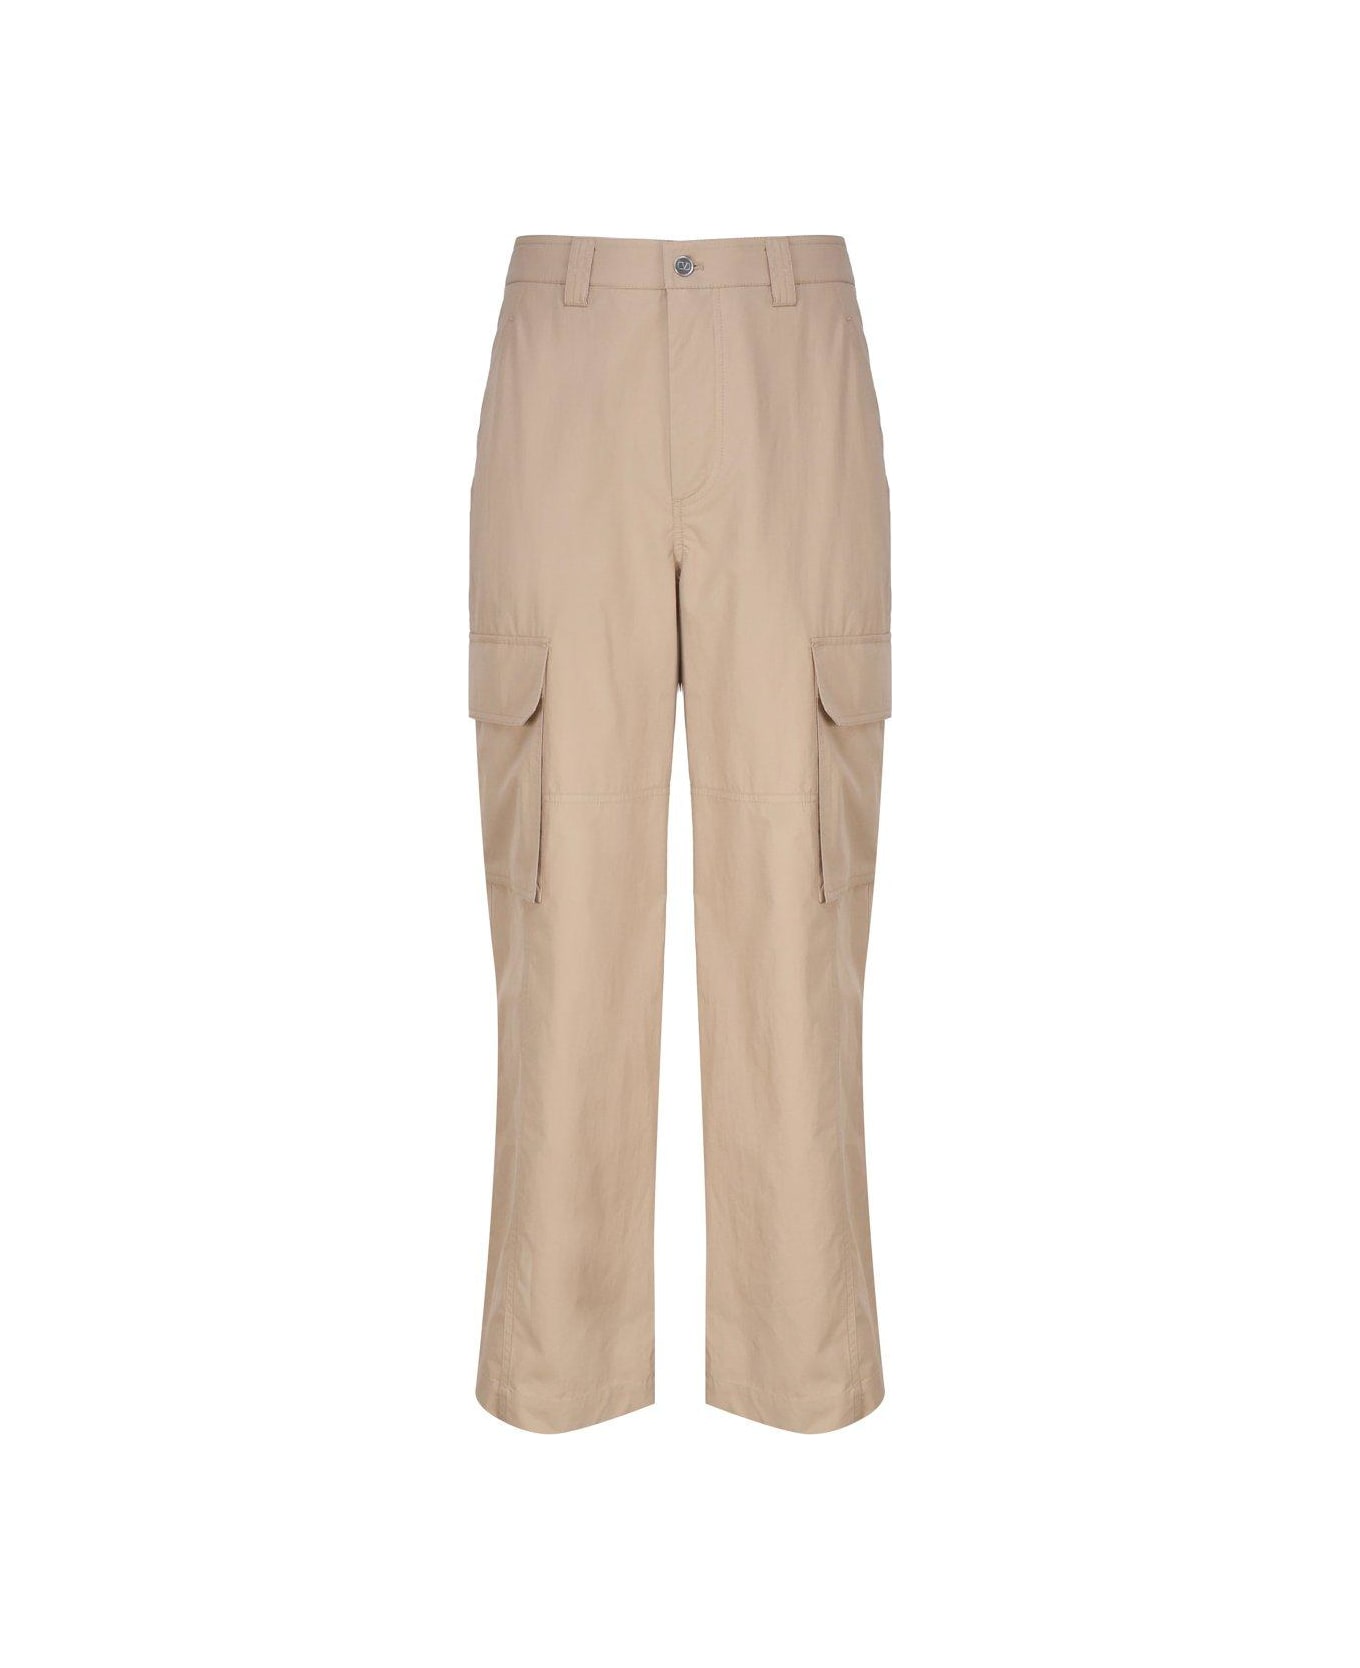 Valentino Button Detailed Straight Leg Pants - Beige ボトムス